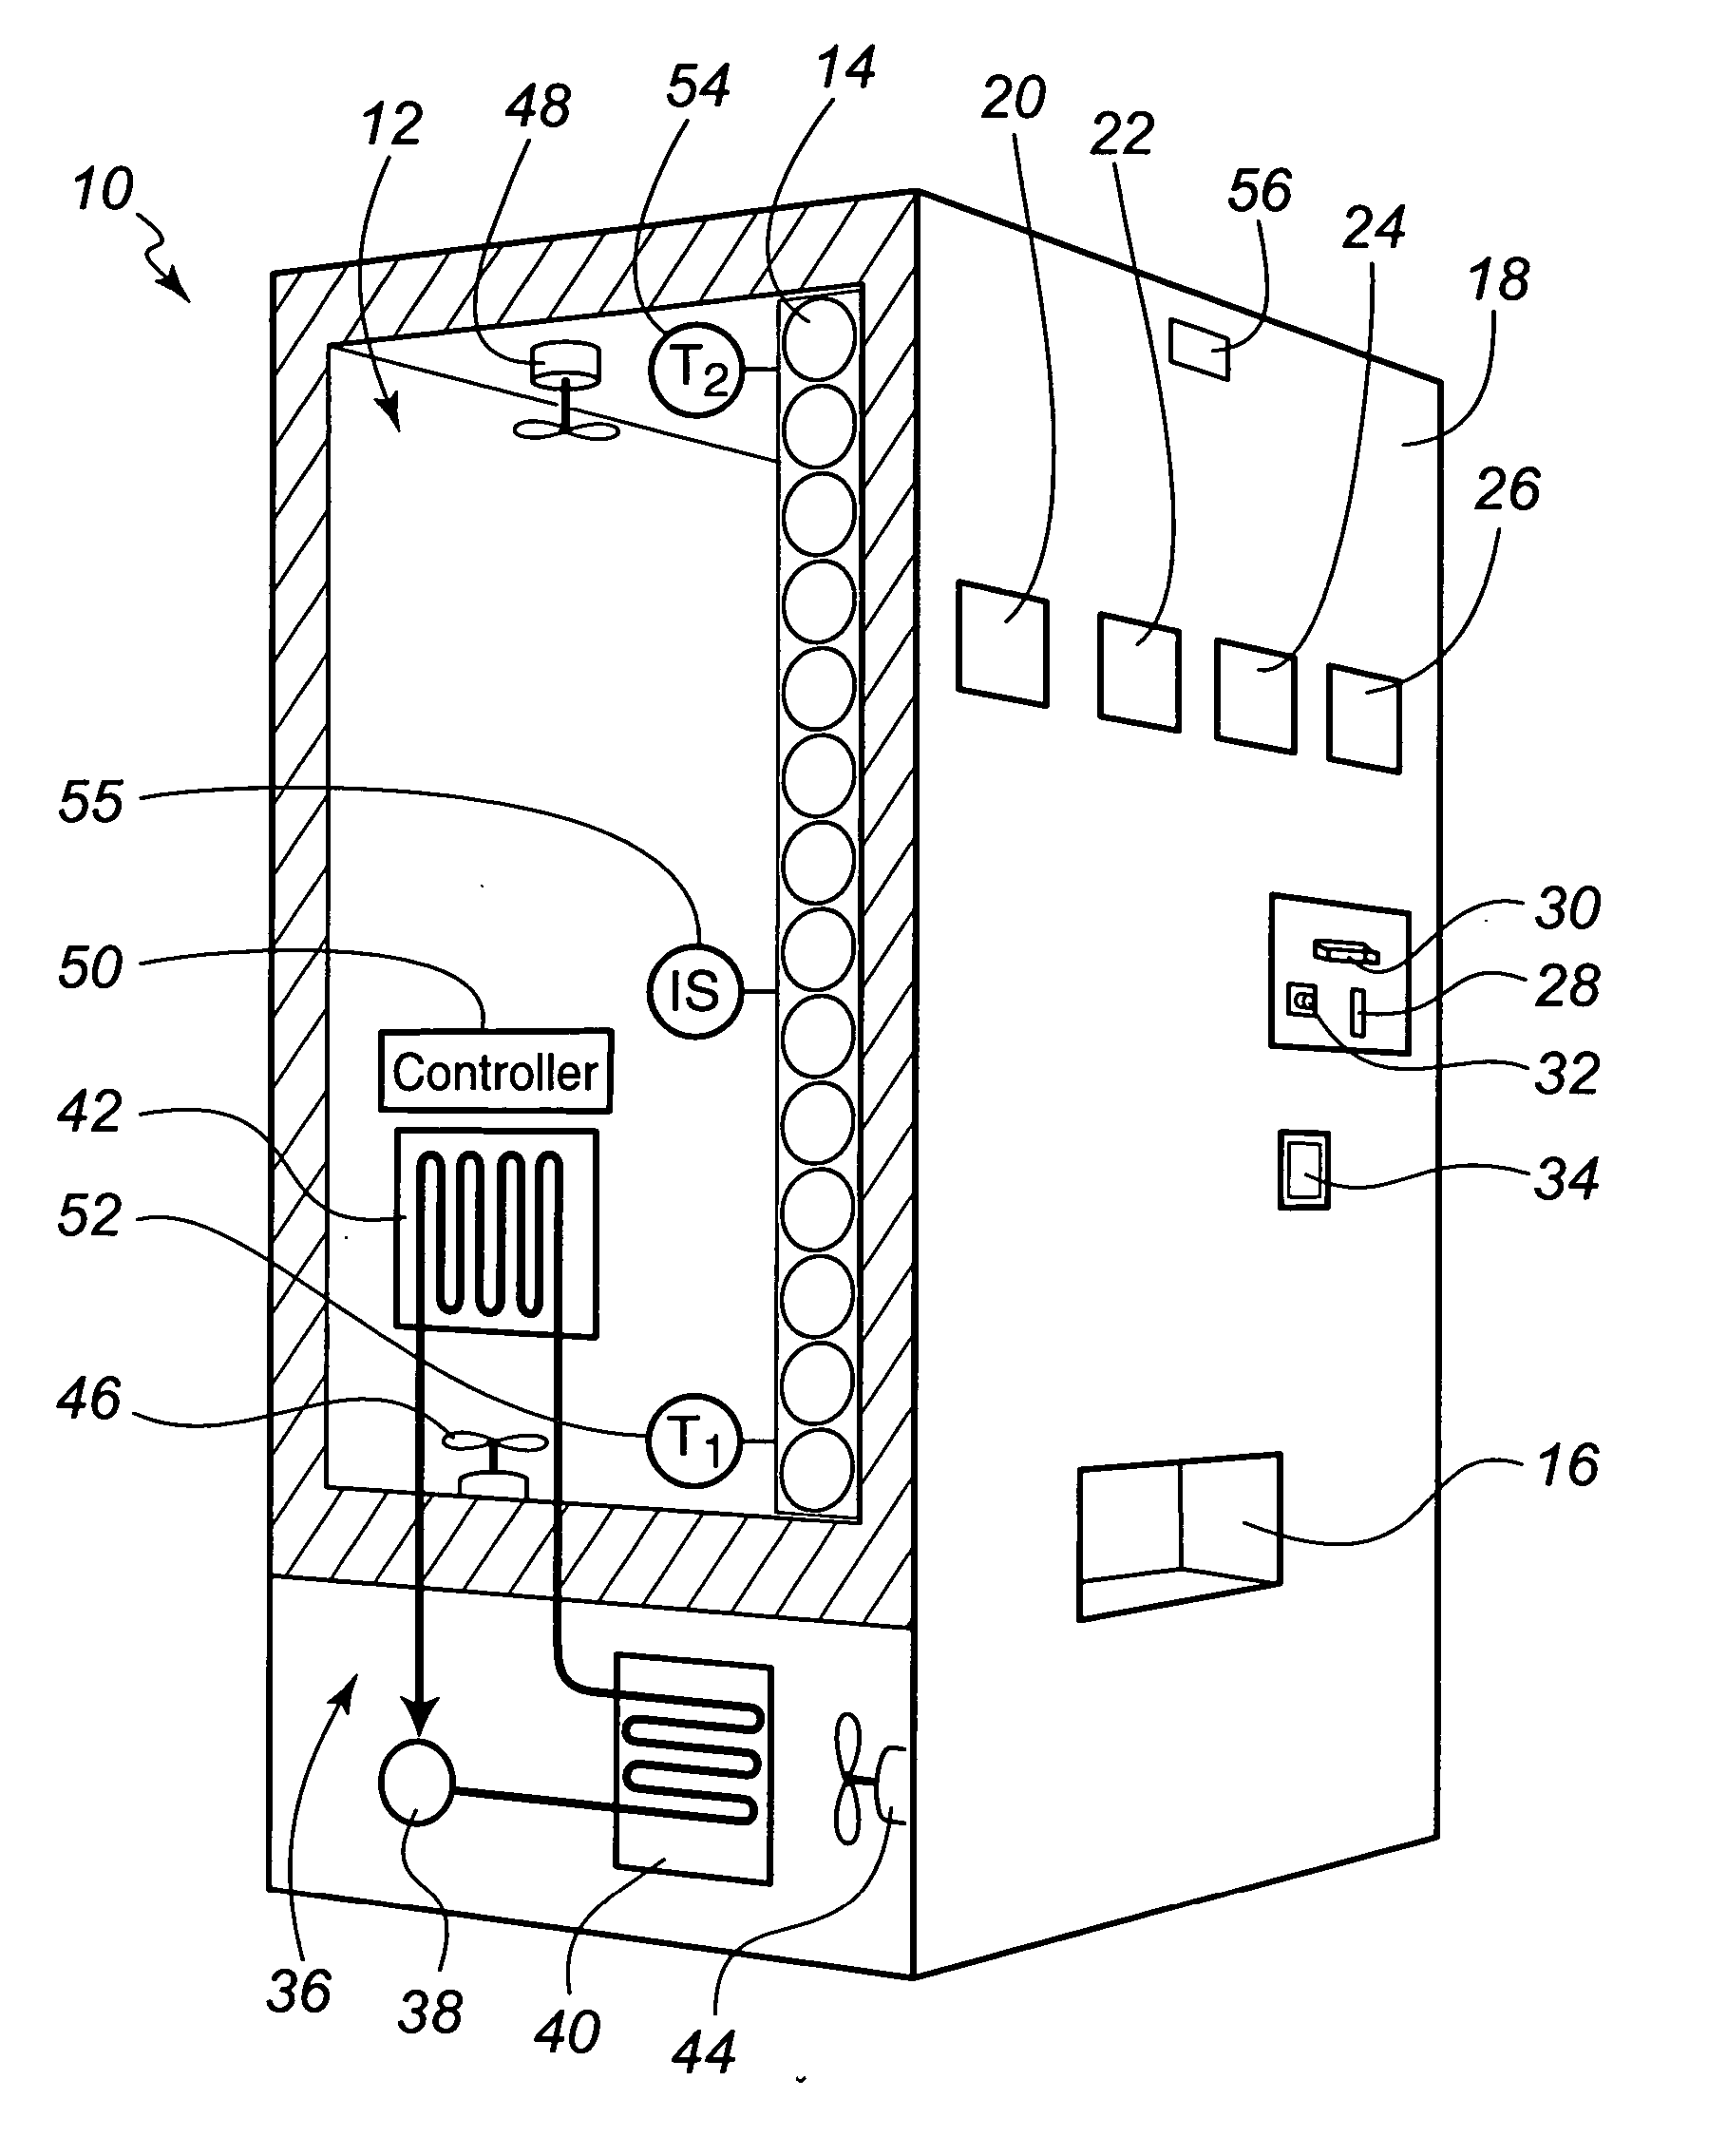 Adaptive energy usage profile management and control system for vending devices and the like